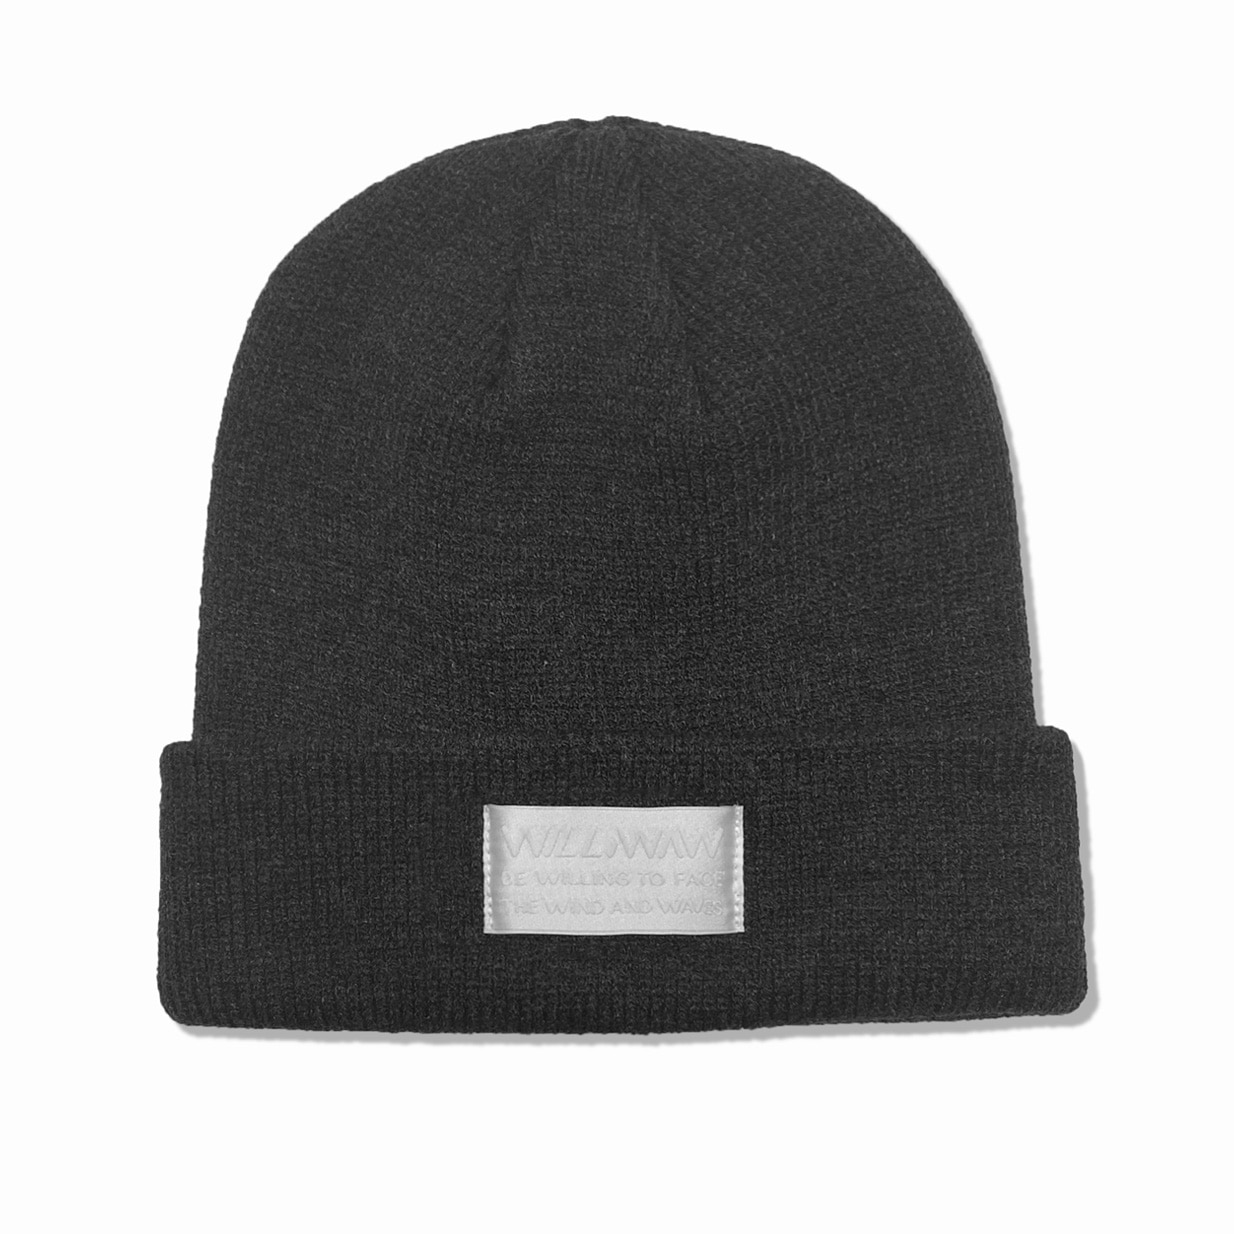 LOGO PATCH BEANIE _ CHARCOAL GRAY